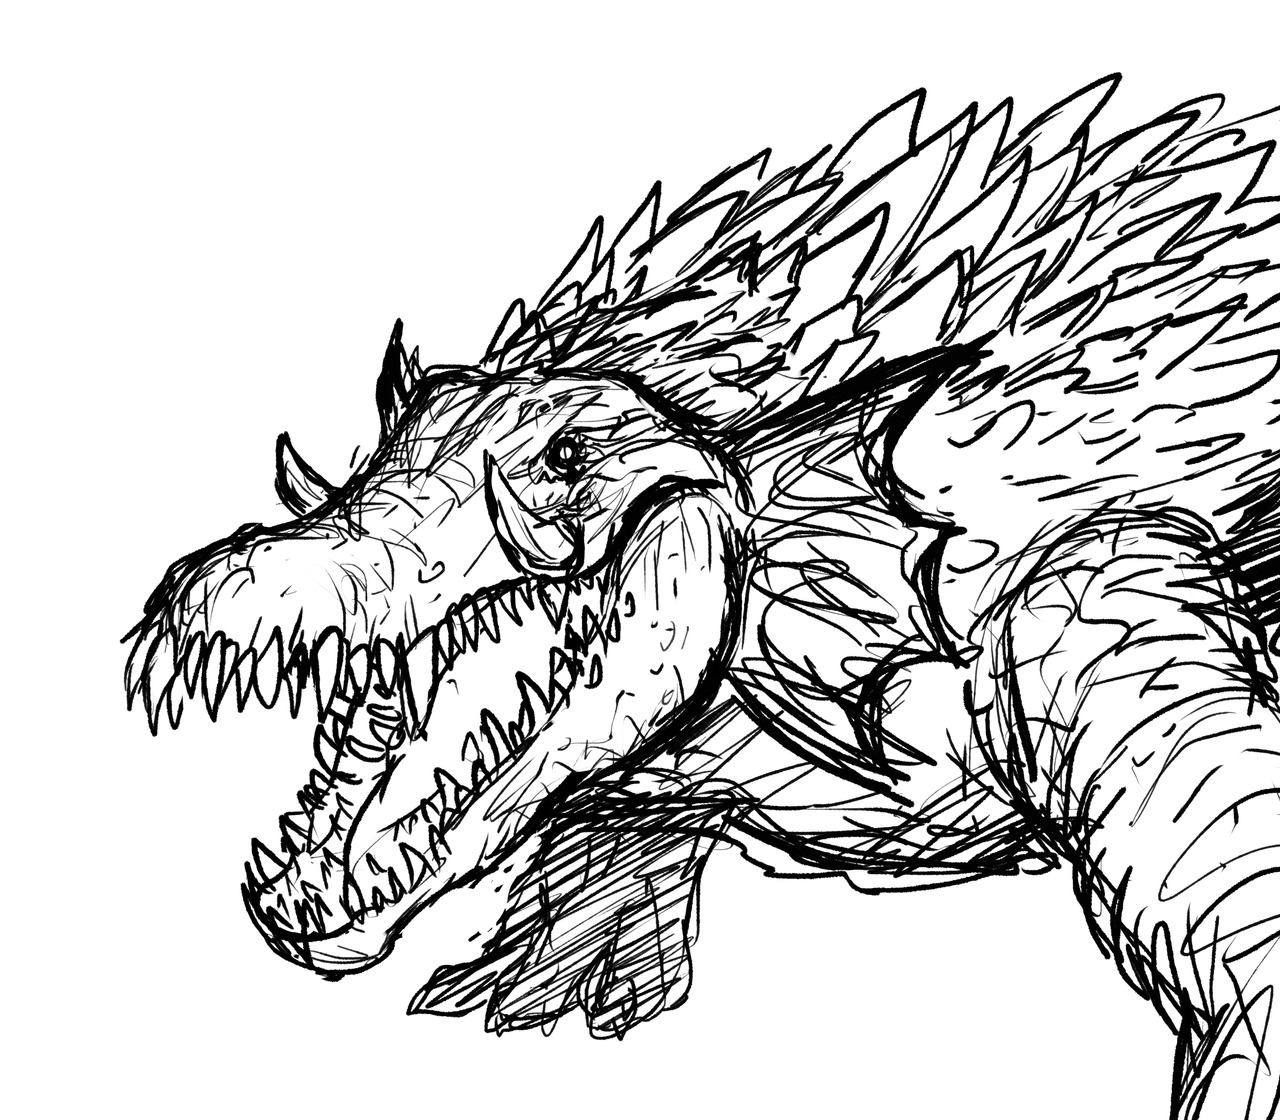 Space Dragon: fasstststs sketch Rampage was fun to watch